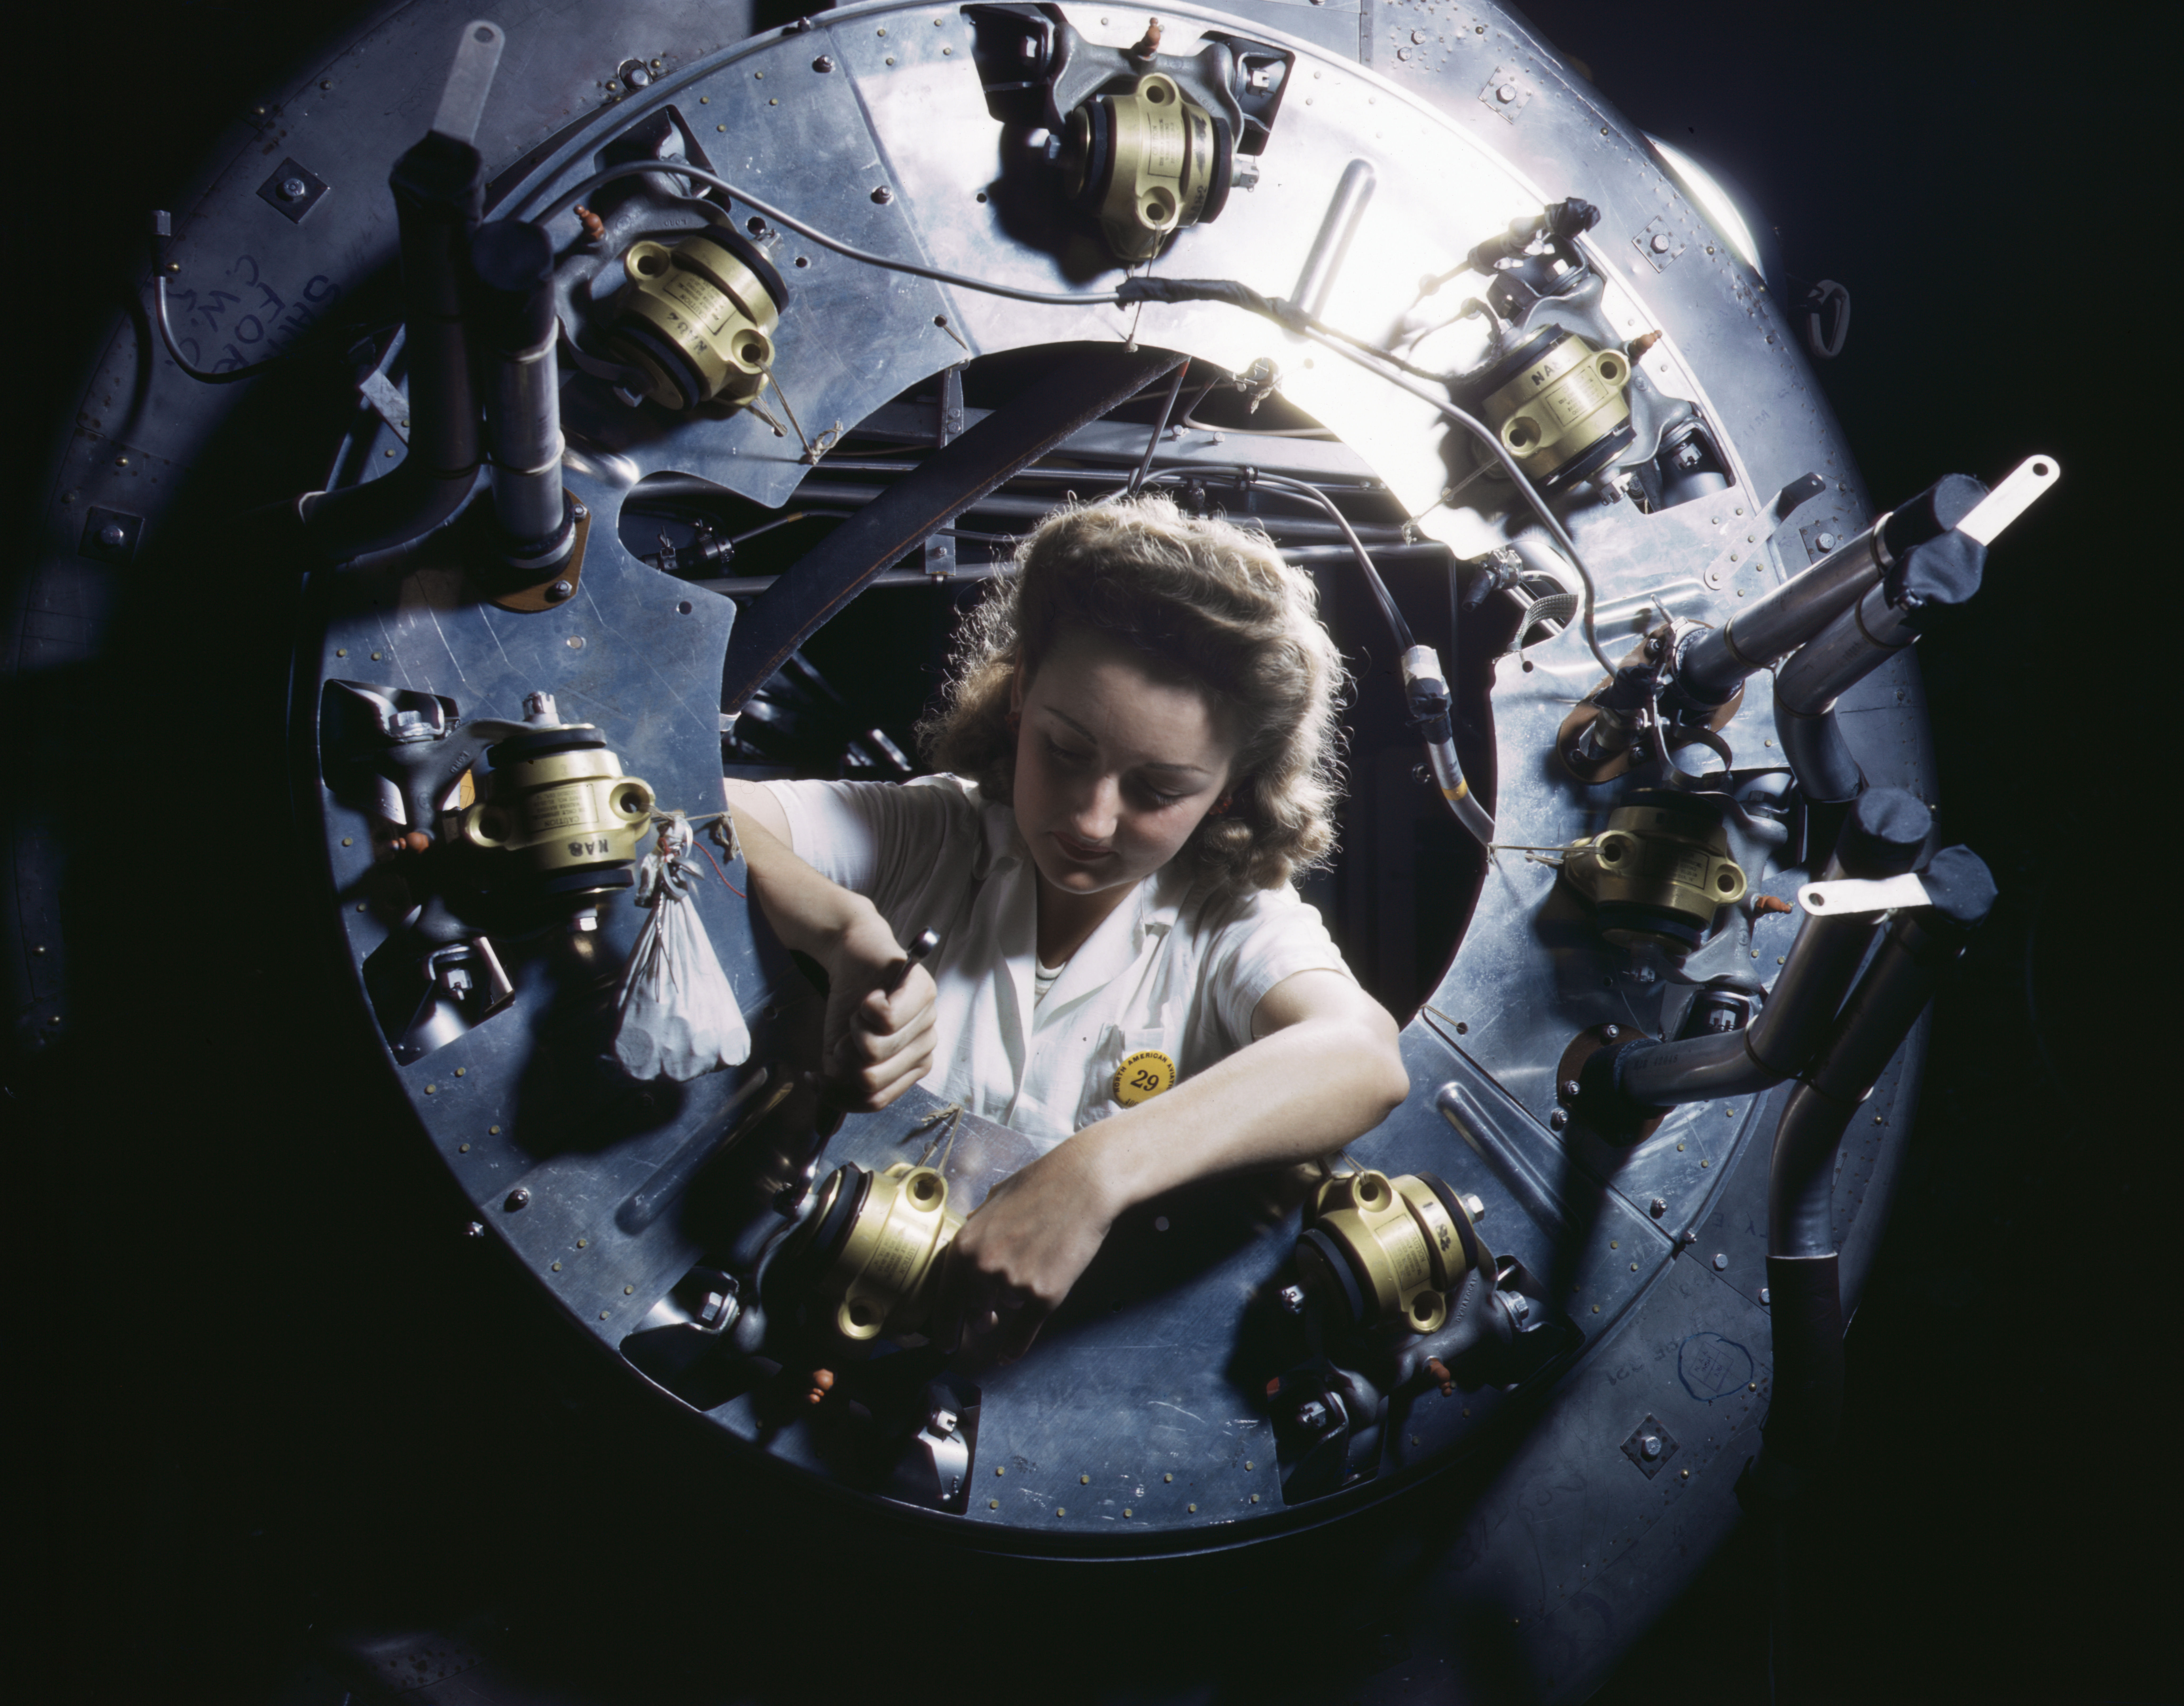 Female worker of North American Aviation working on the cowling of an engine for a B-25 Mitchell bomber, Inglewood, California, United States, Oct 1942